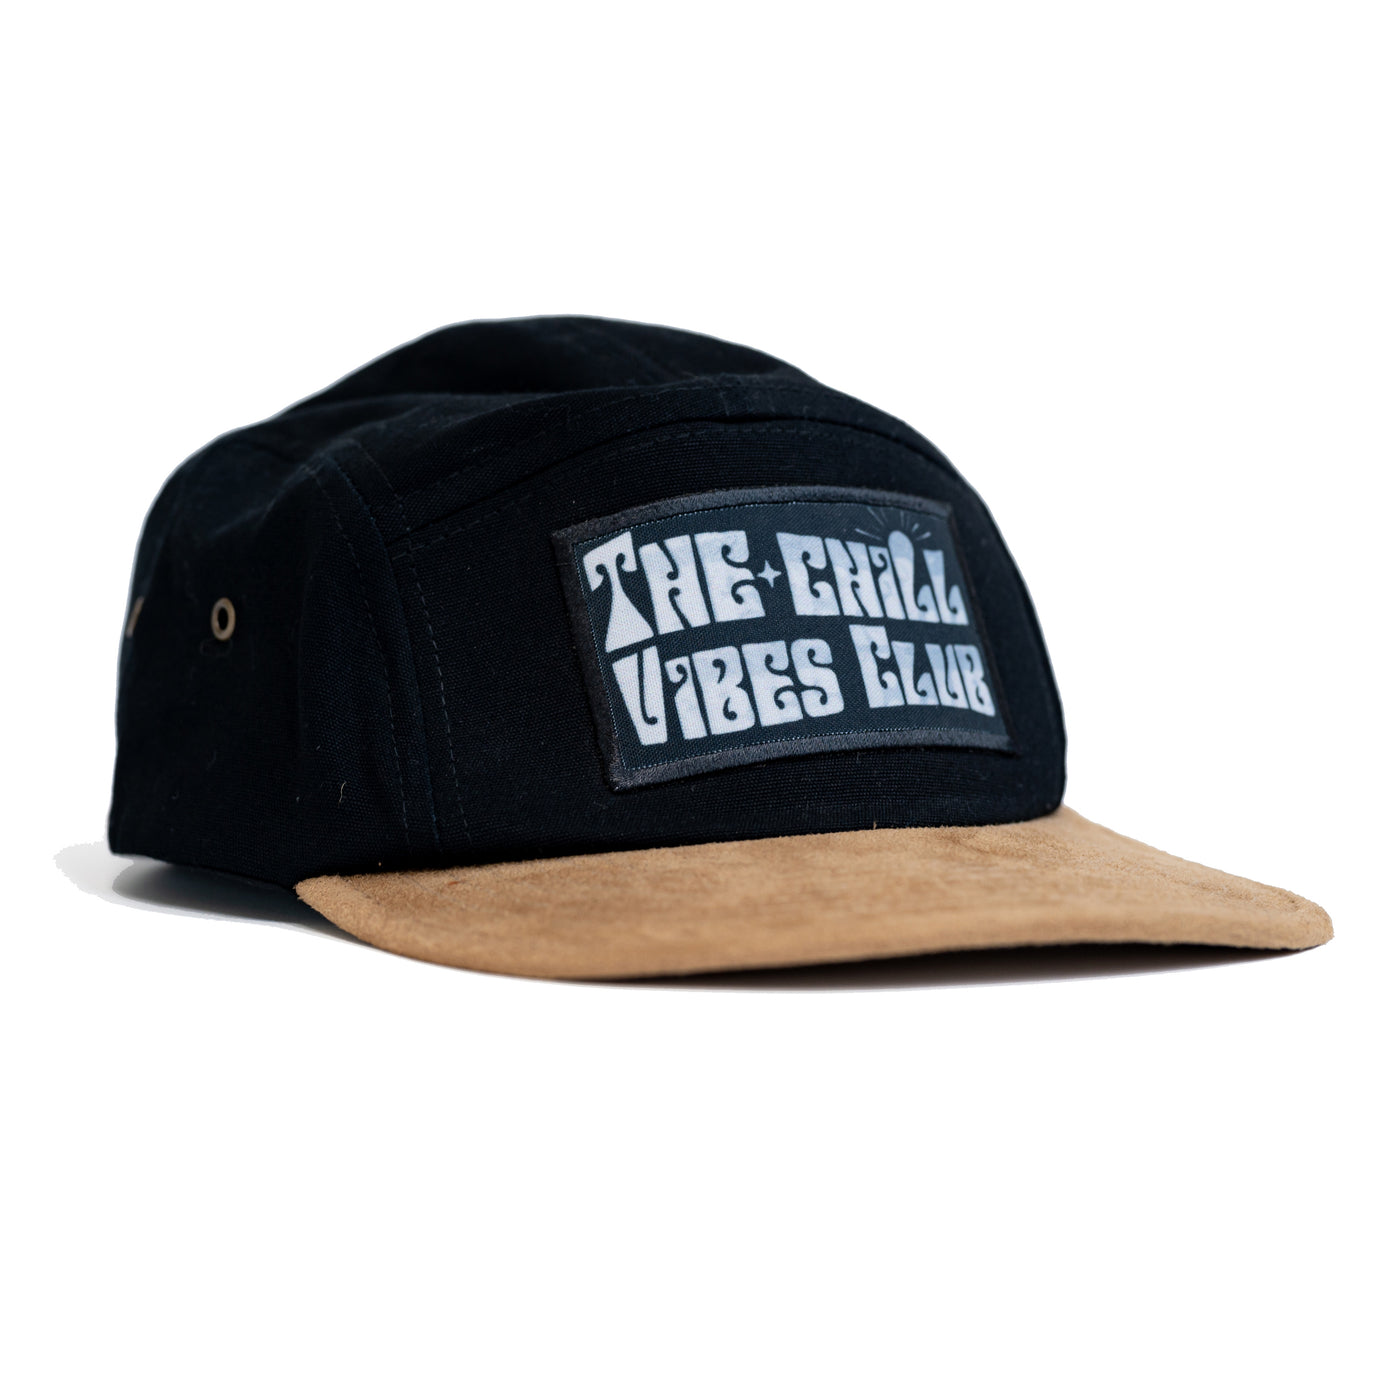 THE CHILL VIBES CLUB HAT